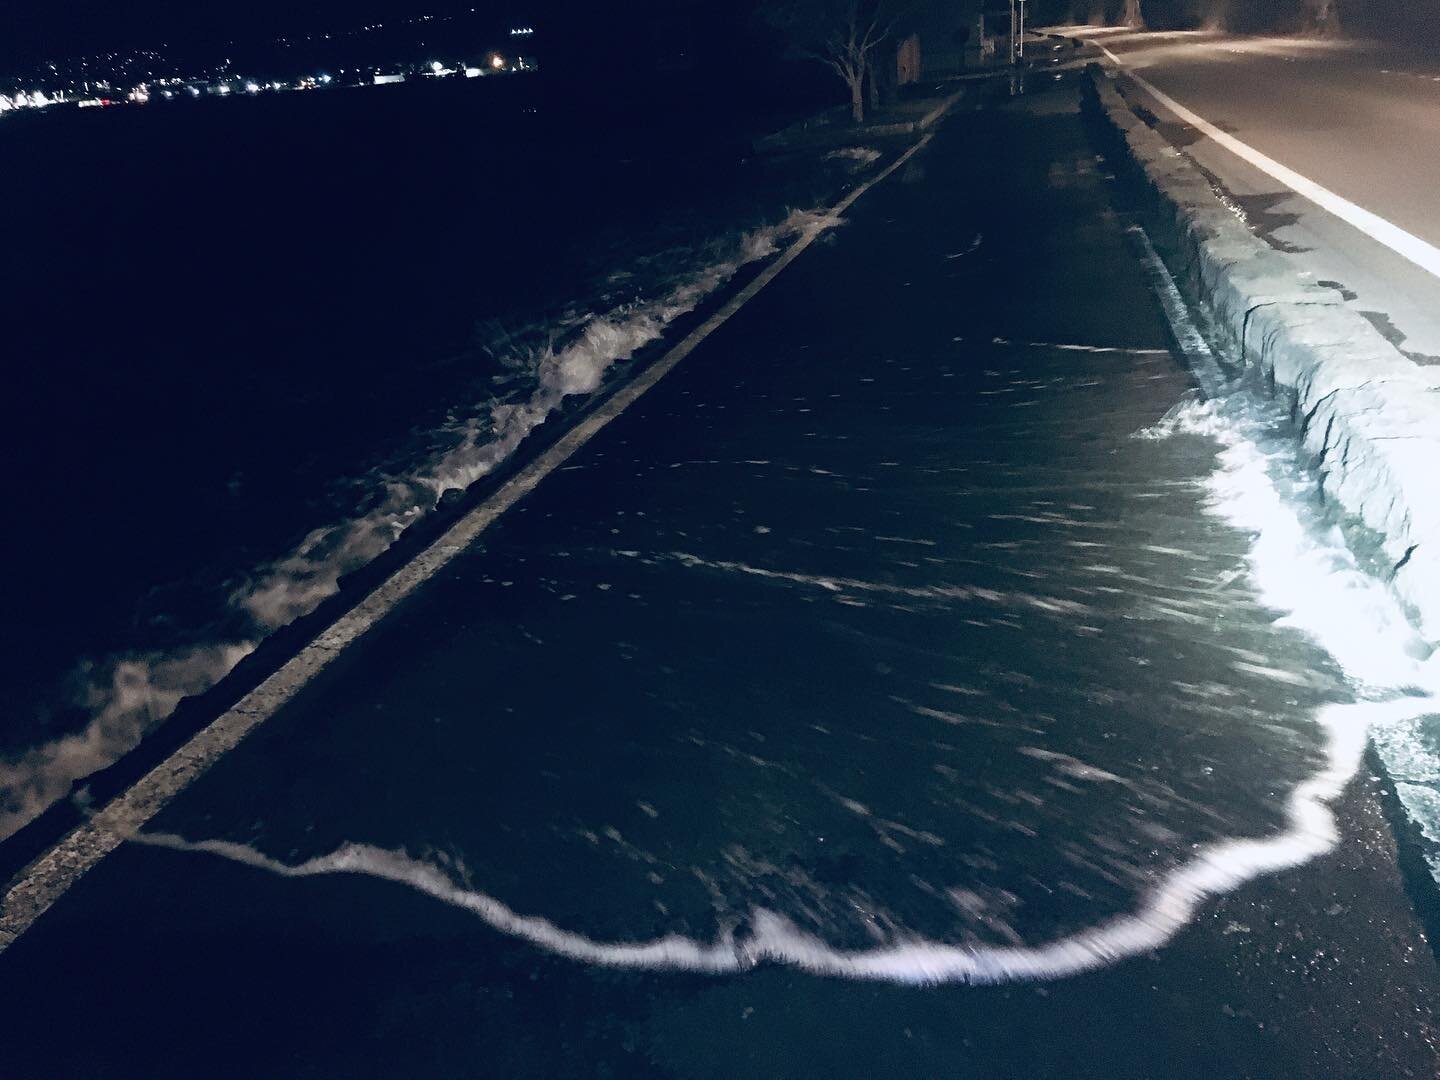 There&rsquo;s a storm tide and a mean warm westerly tail wind turbo boost, the harbour is all over the edge and the lights are out on the causeway. It feels dramatic. Had to hose down the bike. Haven&rsquo;t seen it quite like this before